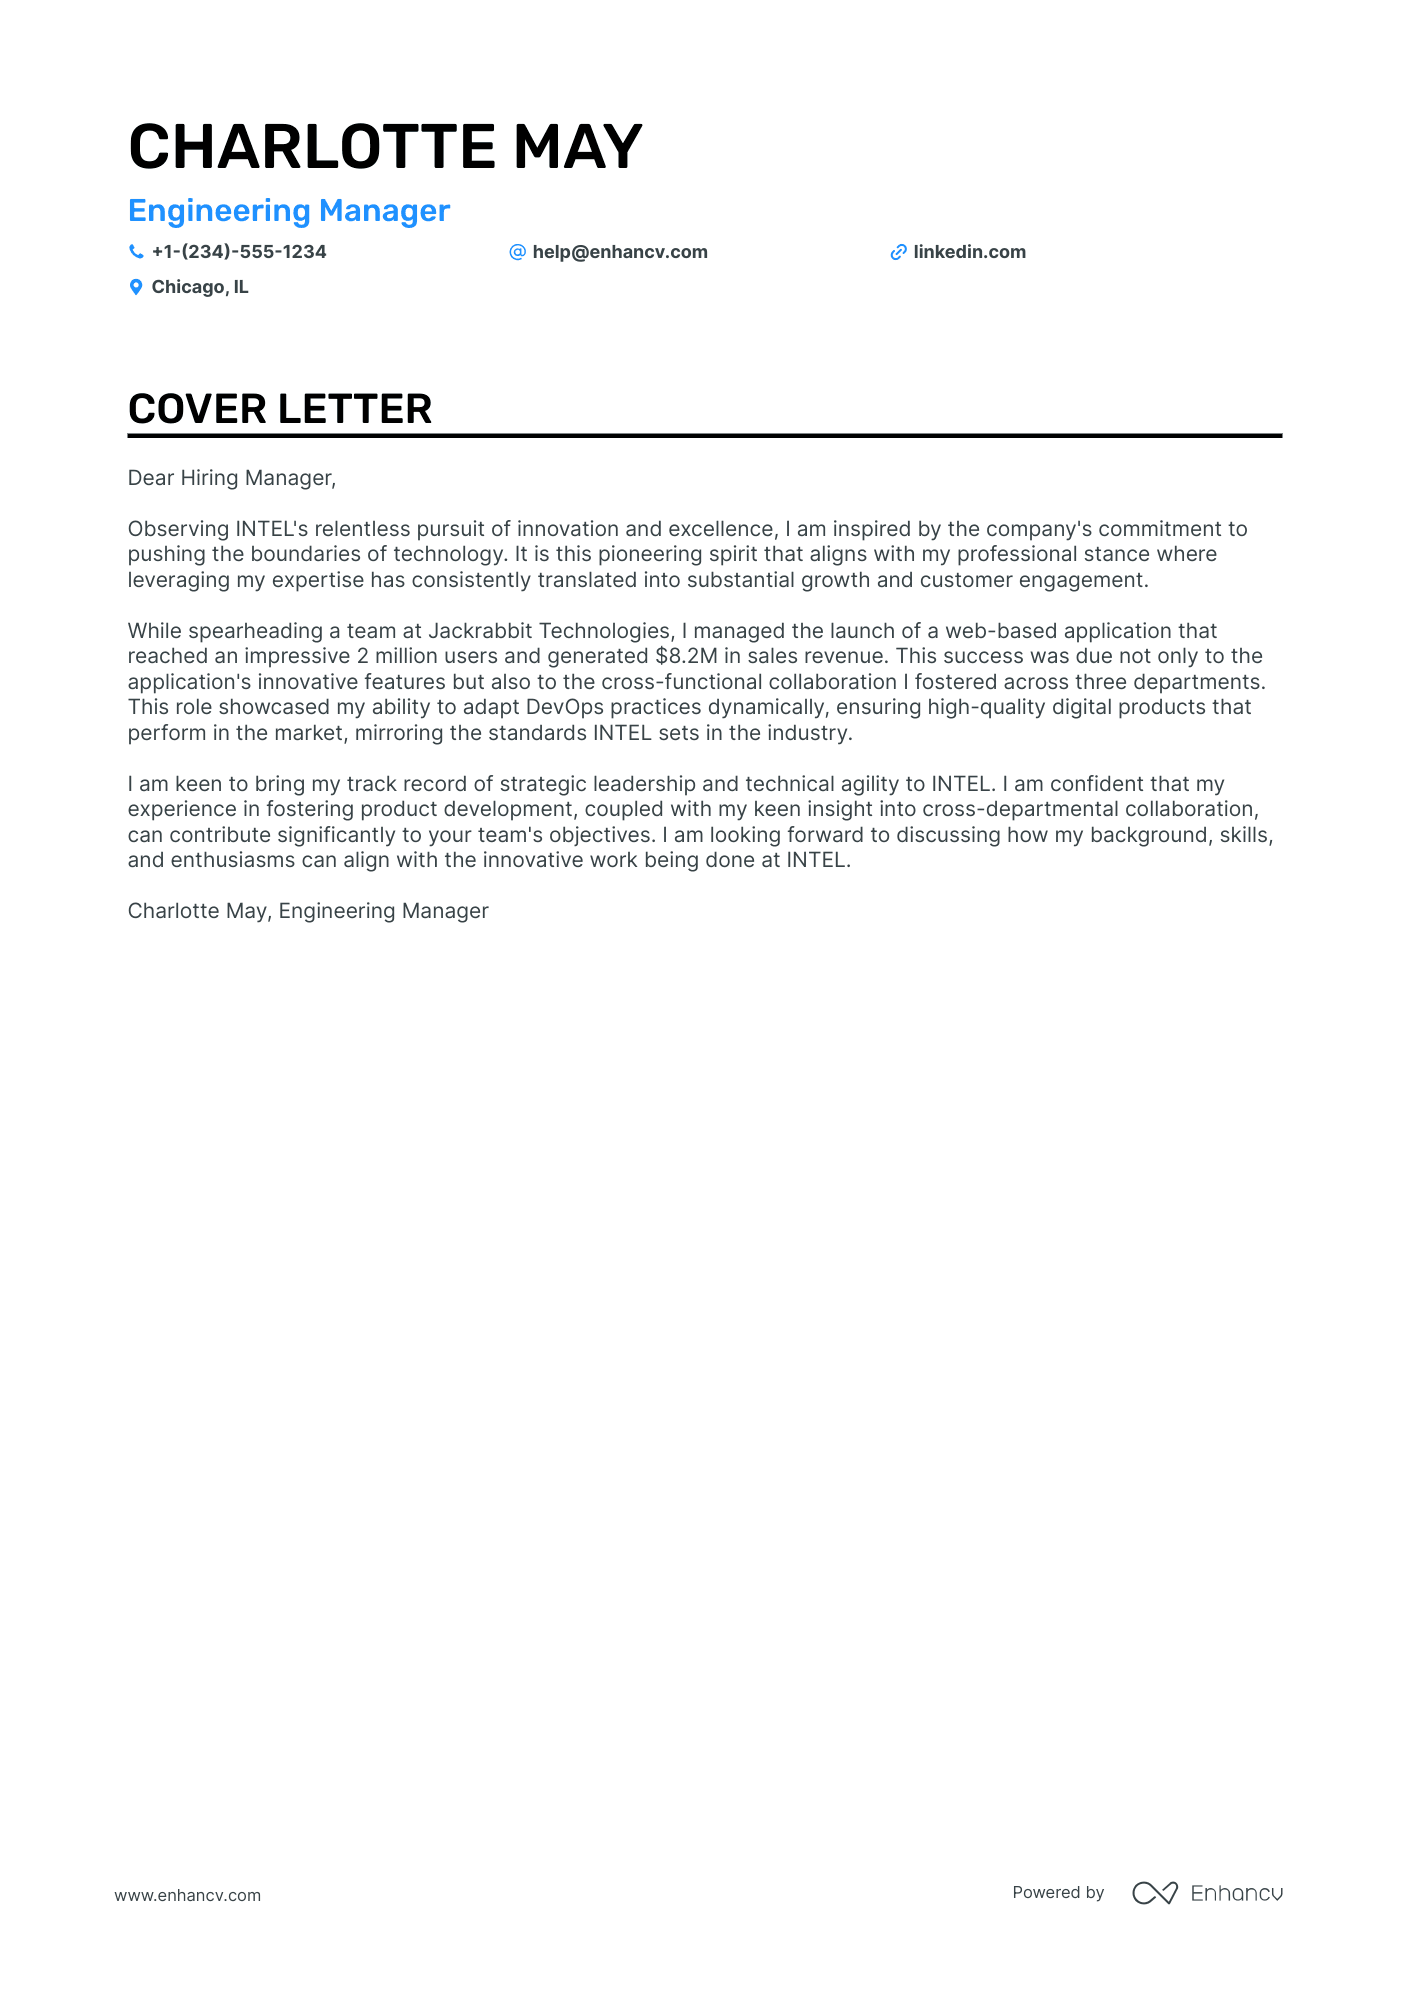 Engineering Manager cover letter